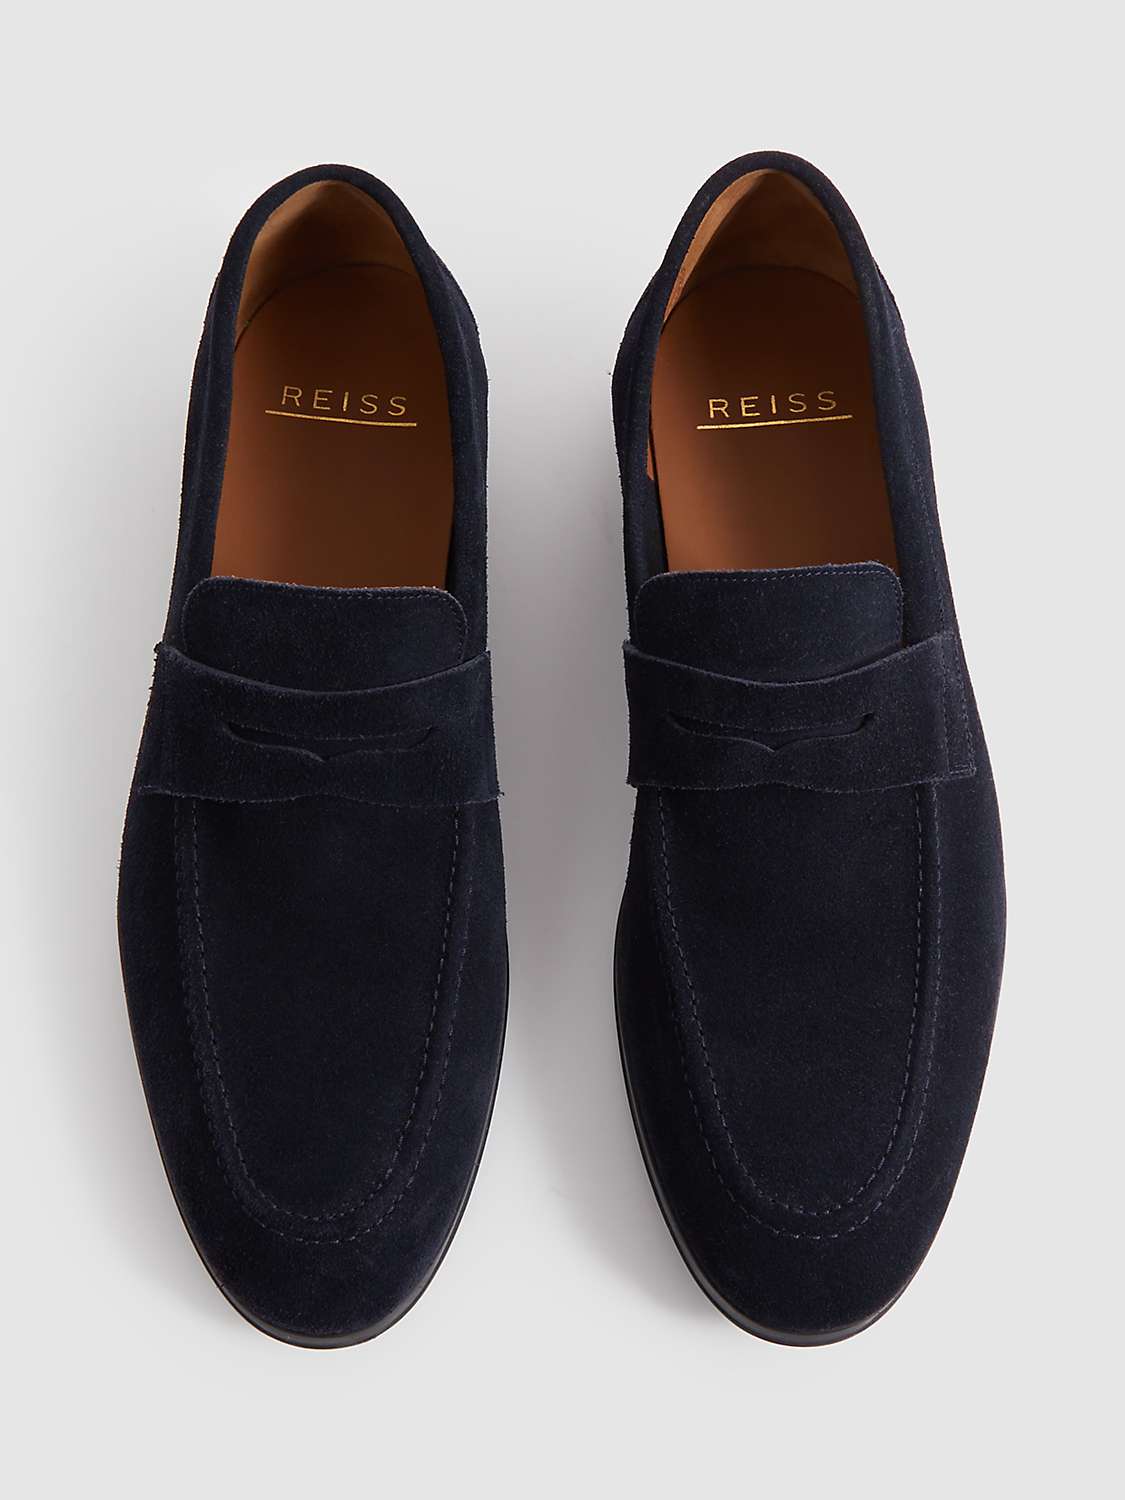 Buy Reiss Bray Suede Loafers, Navy Online at johnlewis.com